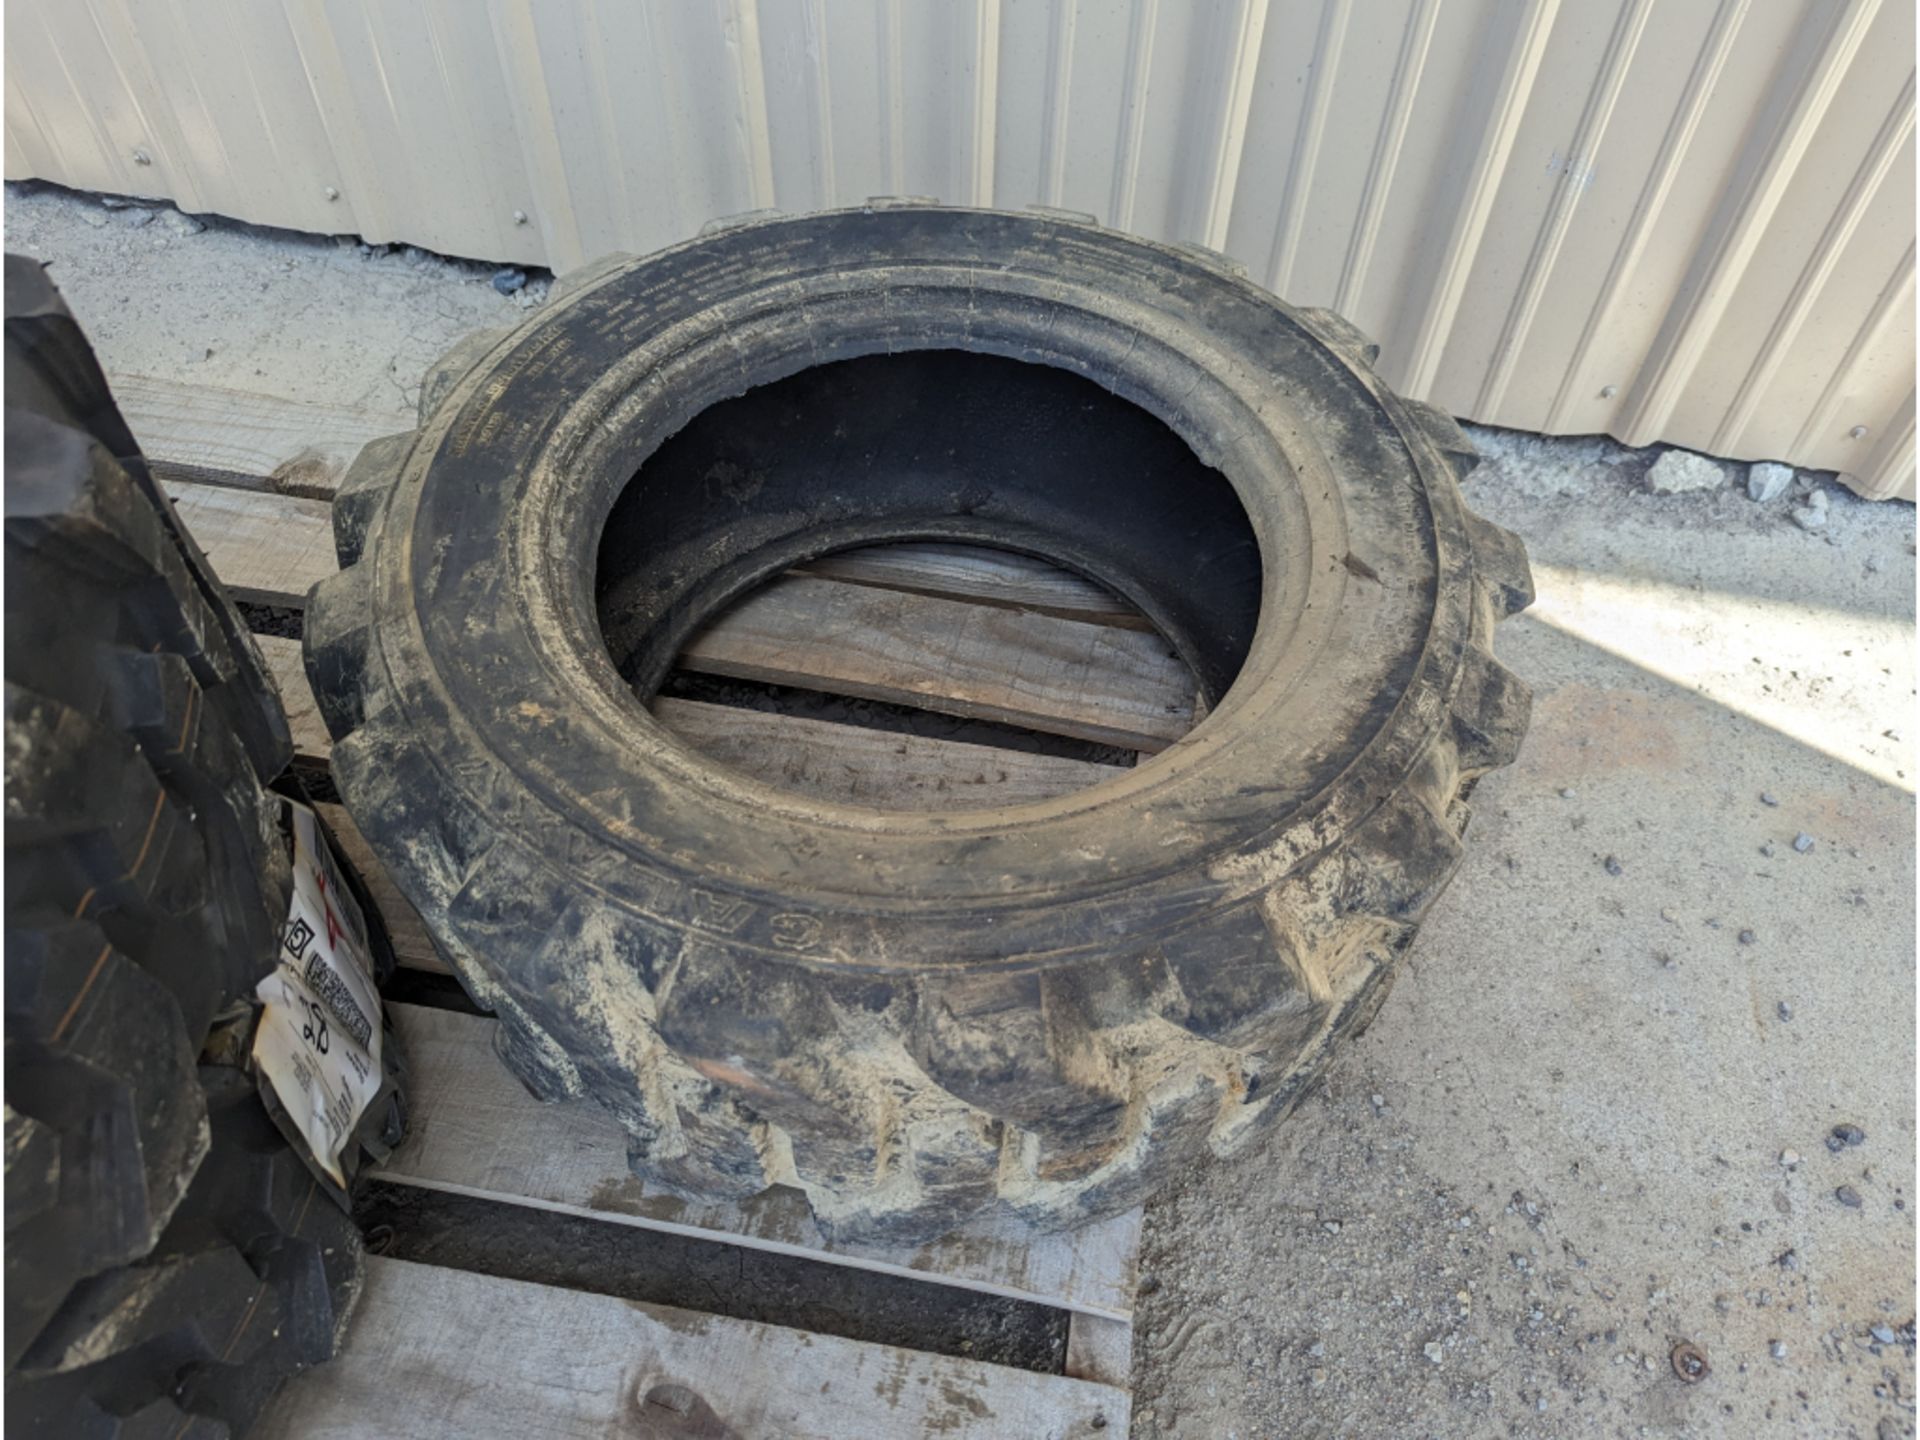 4 NEW Road Crew SKS-1 Skid Steer Tires, 1 Used Tire, 10-16.5 - Image 7 of 10